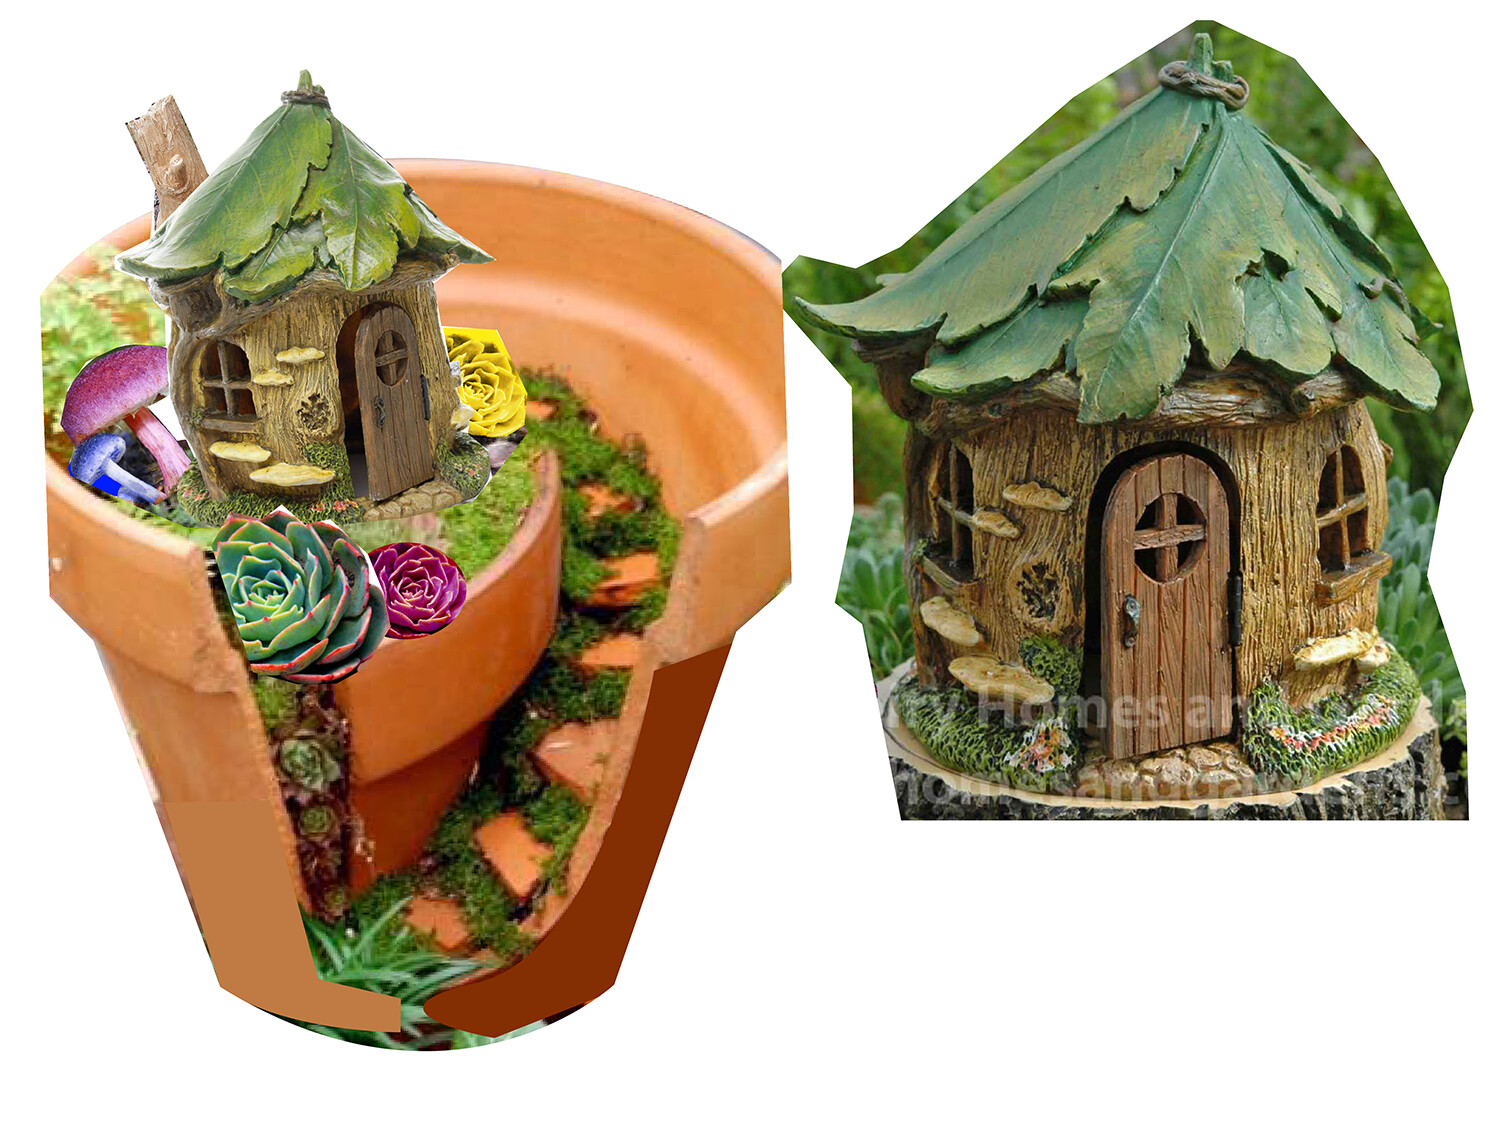 Since I knew about lawn gnome decorations and fairy houses I started the project by gathering images from various places and compositing them together to get my composition.